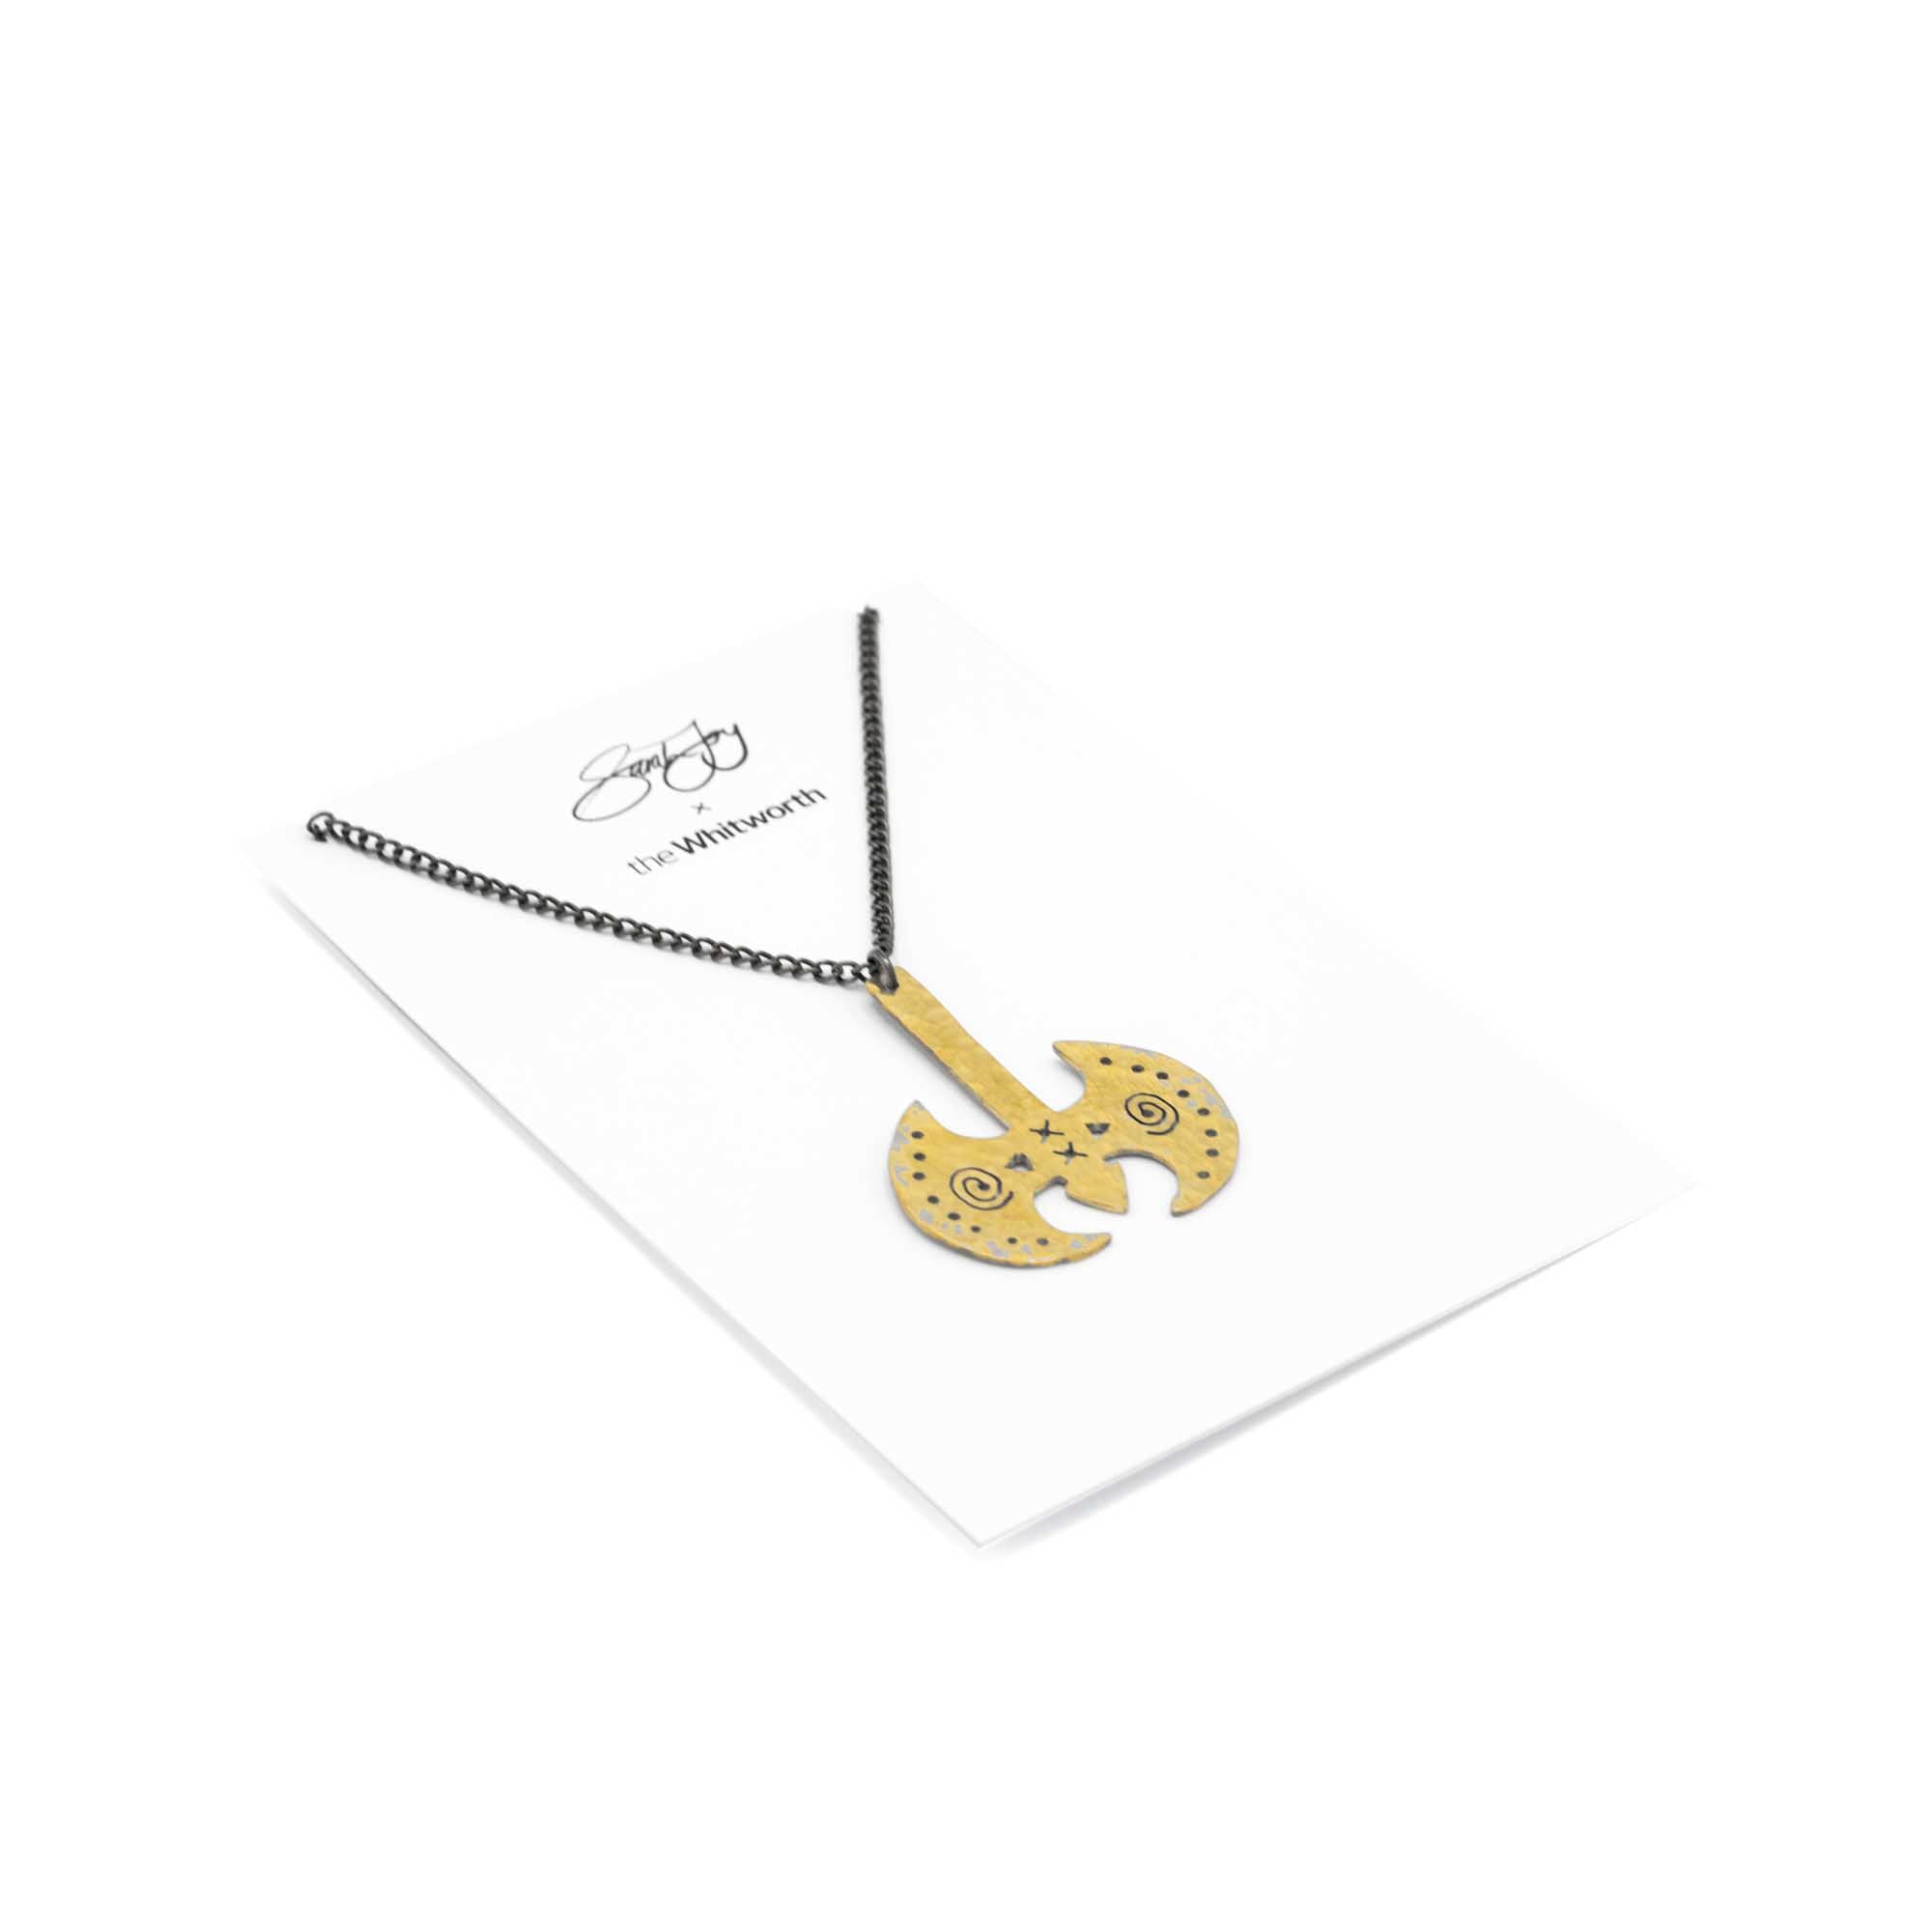 Gold Labrys pendant necklace against a white backdrop. Card backing.